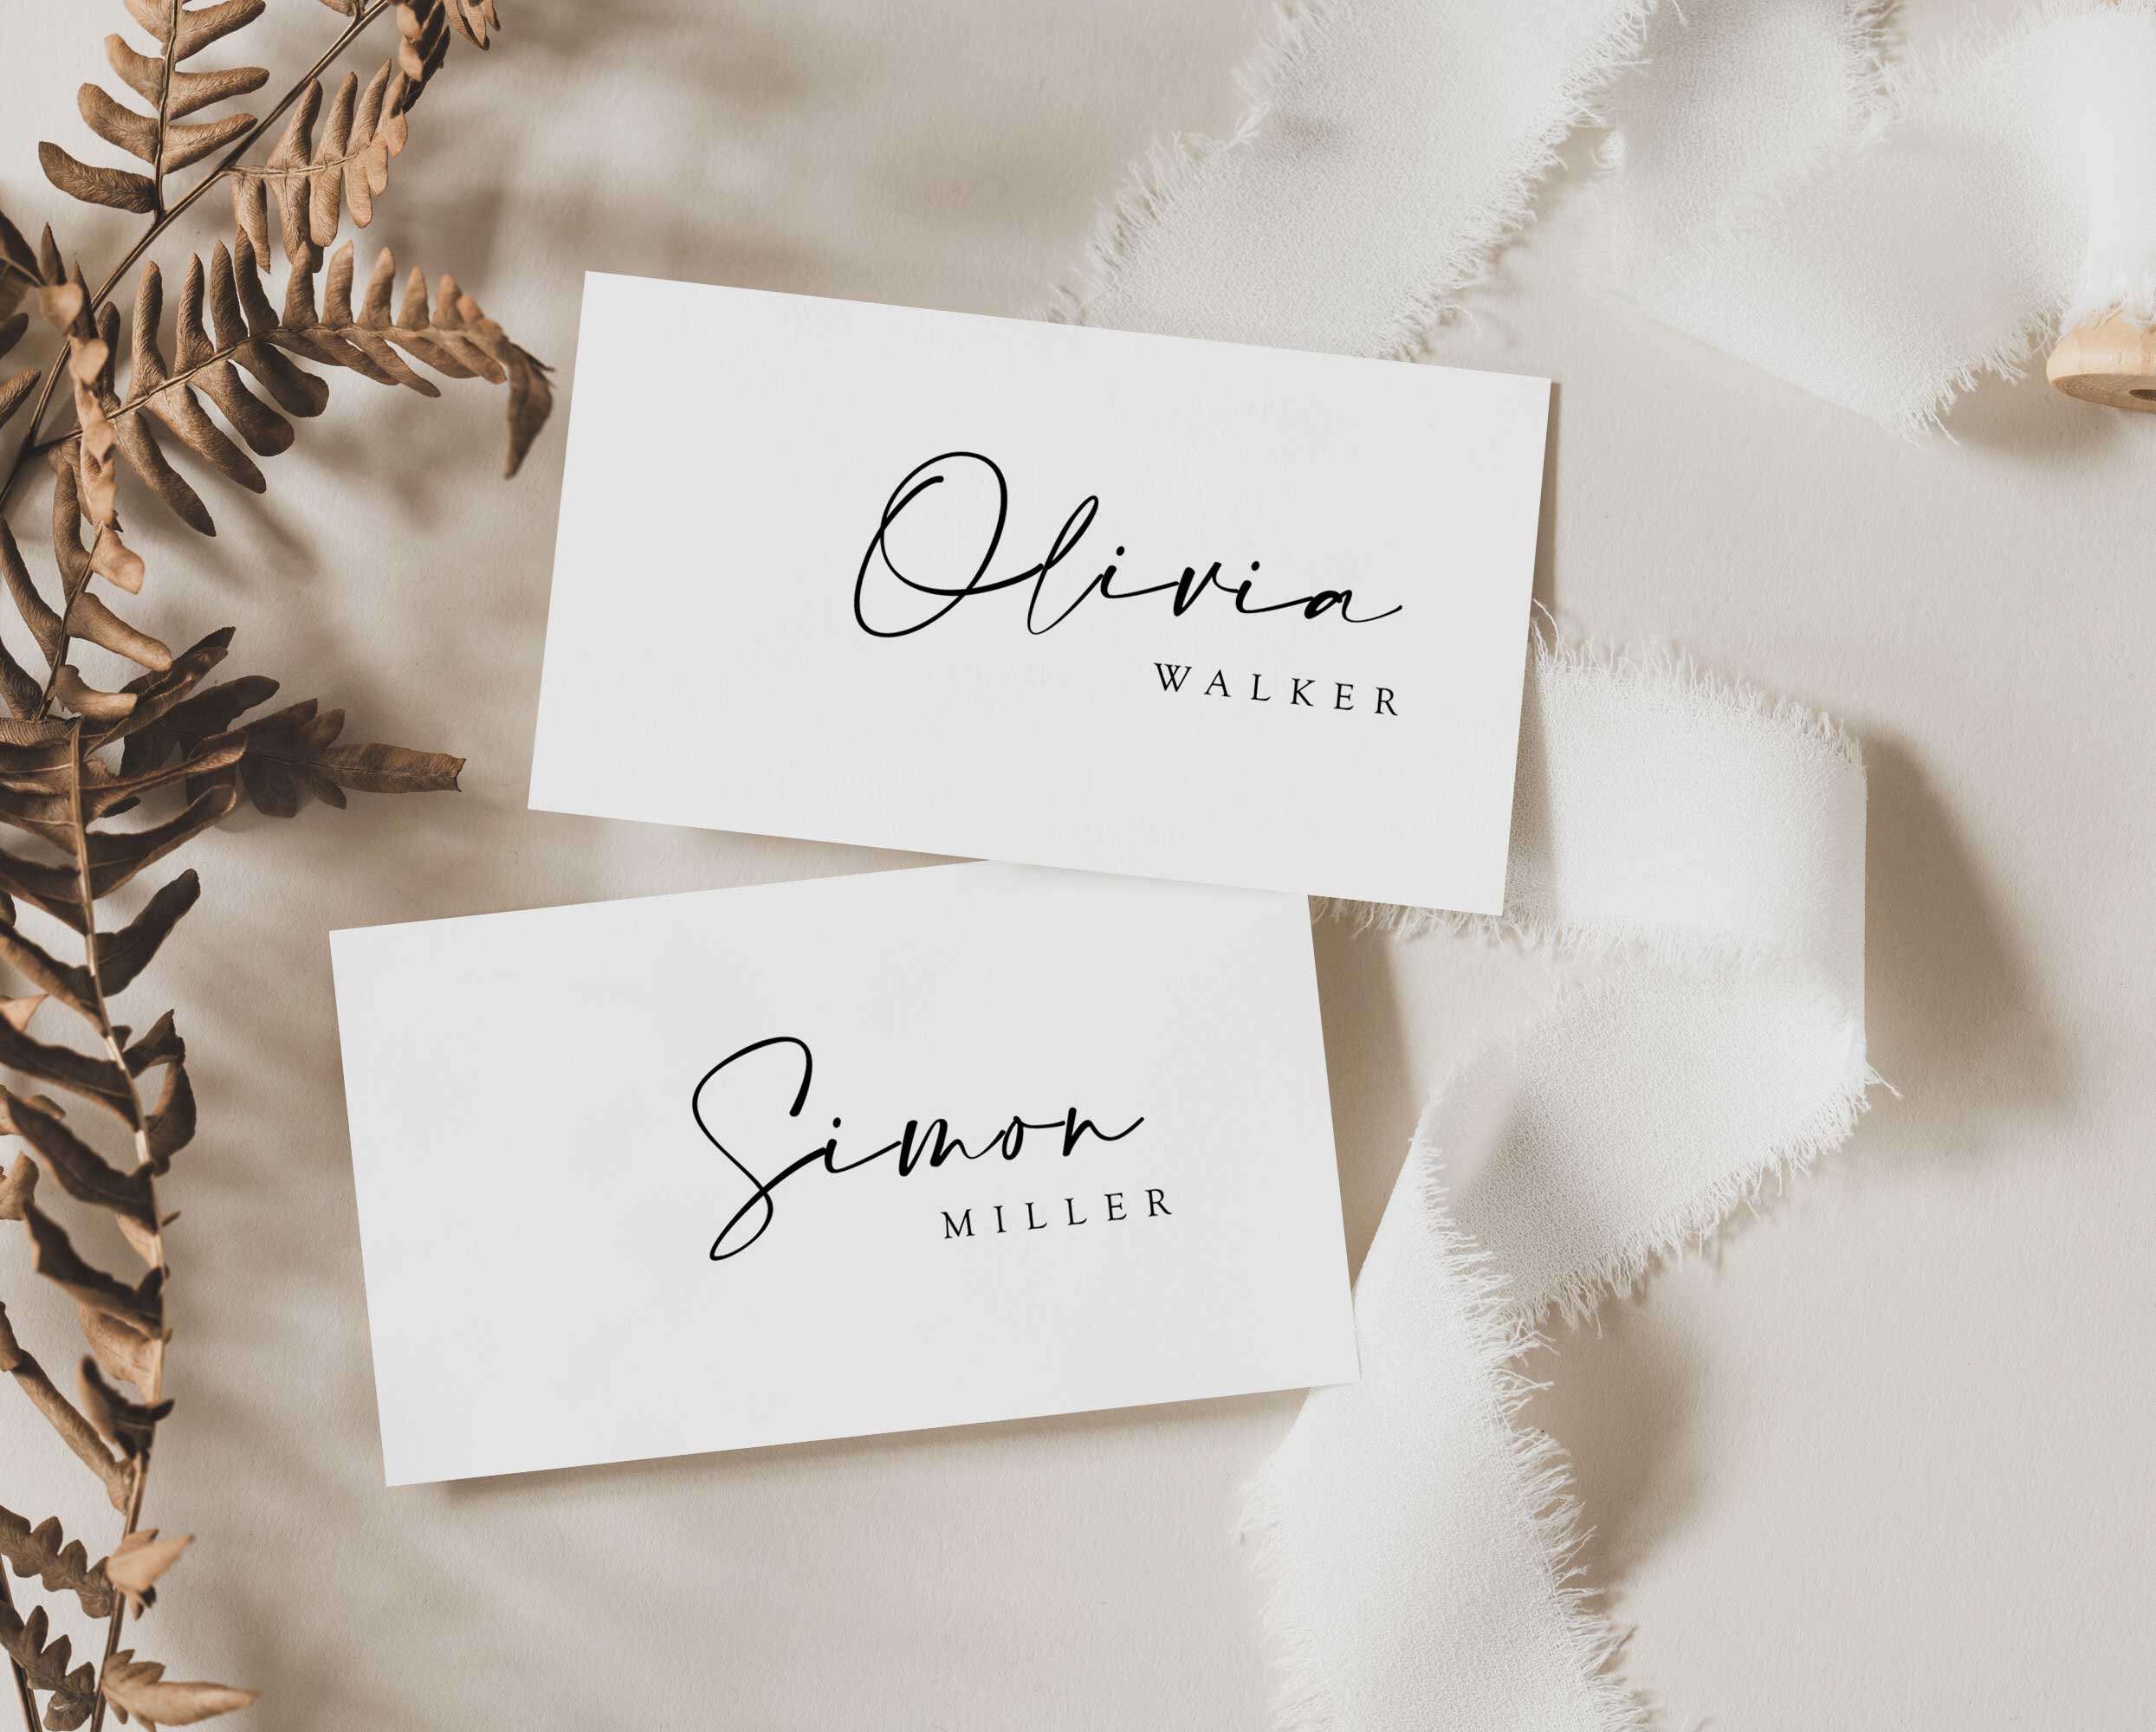 Supla 120 Pcs Table Setting Name White Place Cards Blank Escort Cards Wedding Party Table Menu Tent Cards Table Name Number Seating Cards Guest Cards Buffet cards for Wedding Birthday Bride Shower 